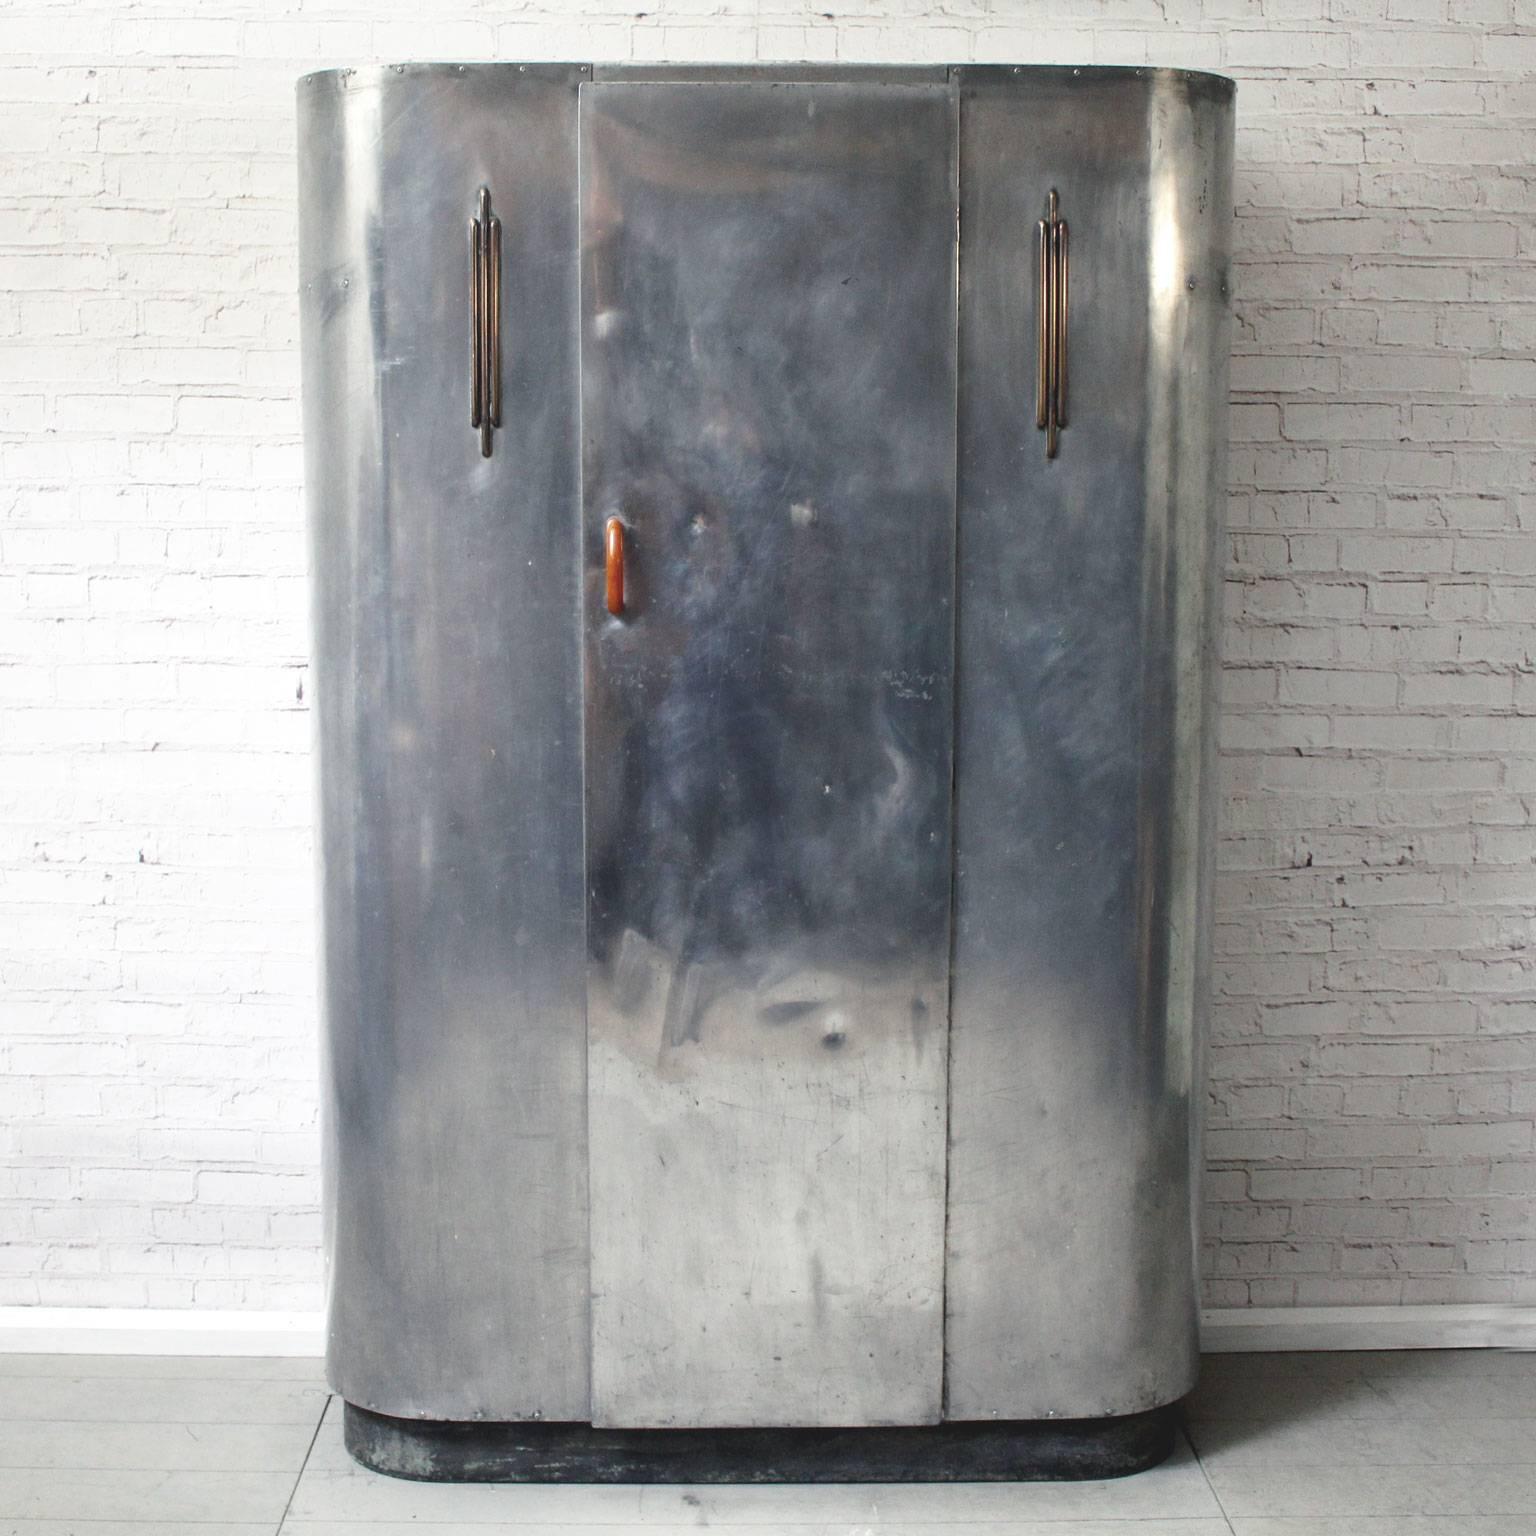 This sleek wardrobe was made by British company Huntington Aviation just after World War II from high grade aircraft aluminium surplus used for WWII planes. We believe this piece, based on the airstream mobile home design, to be by Ernest Race.
We